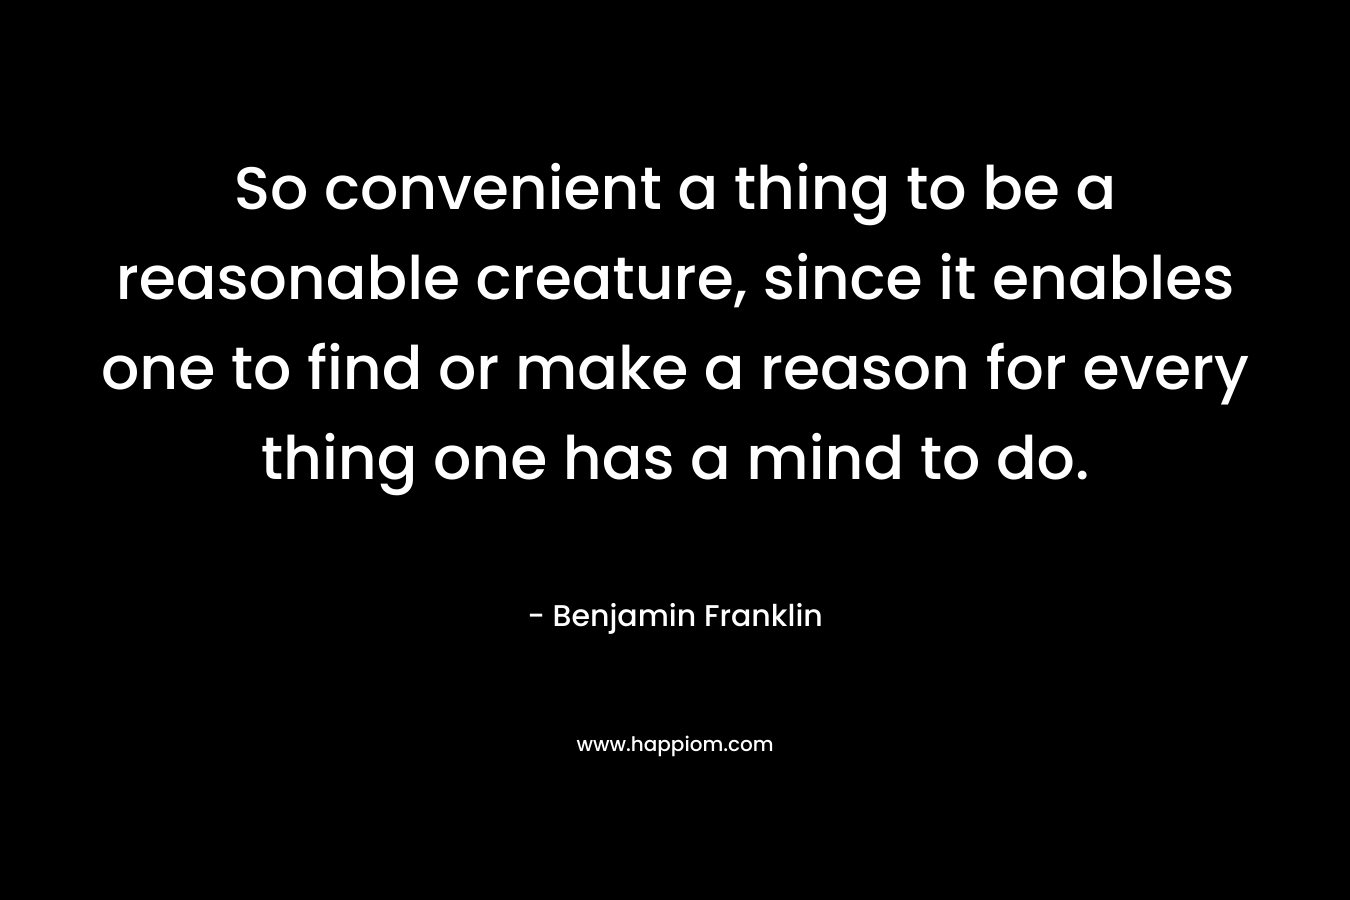 So convenient a thing to be a reasonable creature, since it enables one to find or make a reason for every thing one has a mind to do.